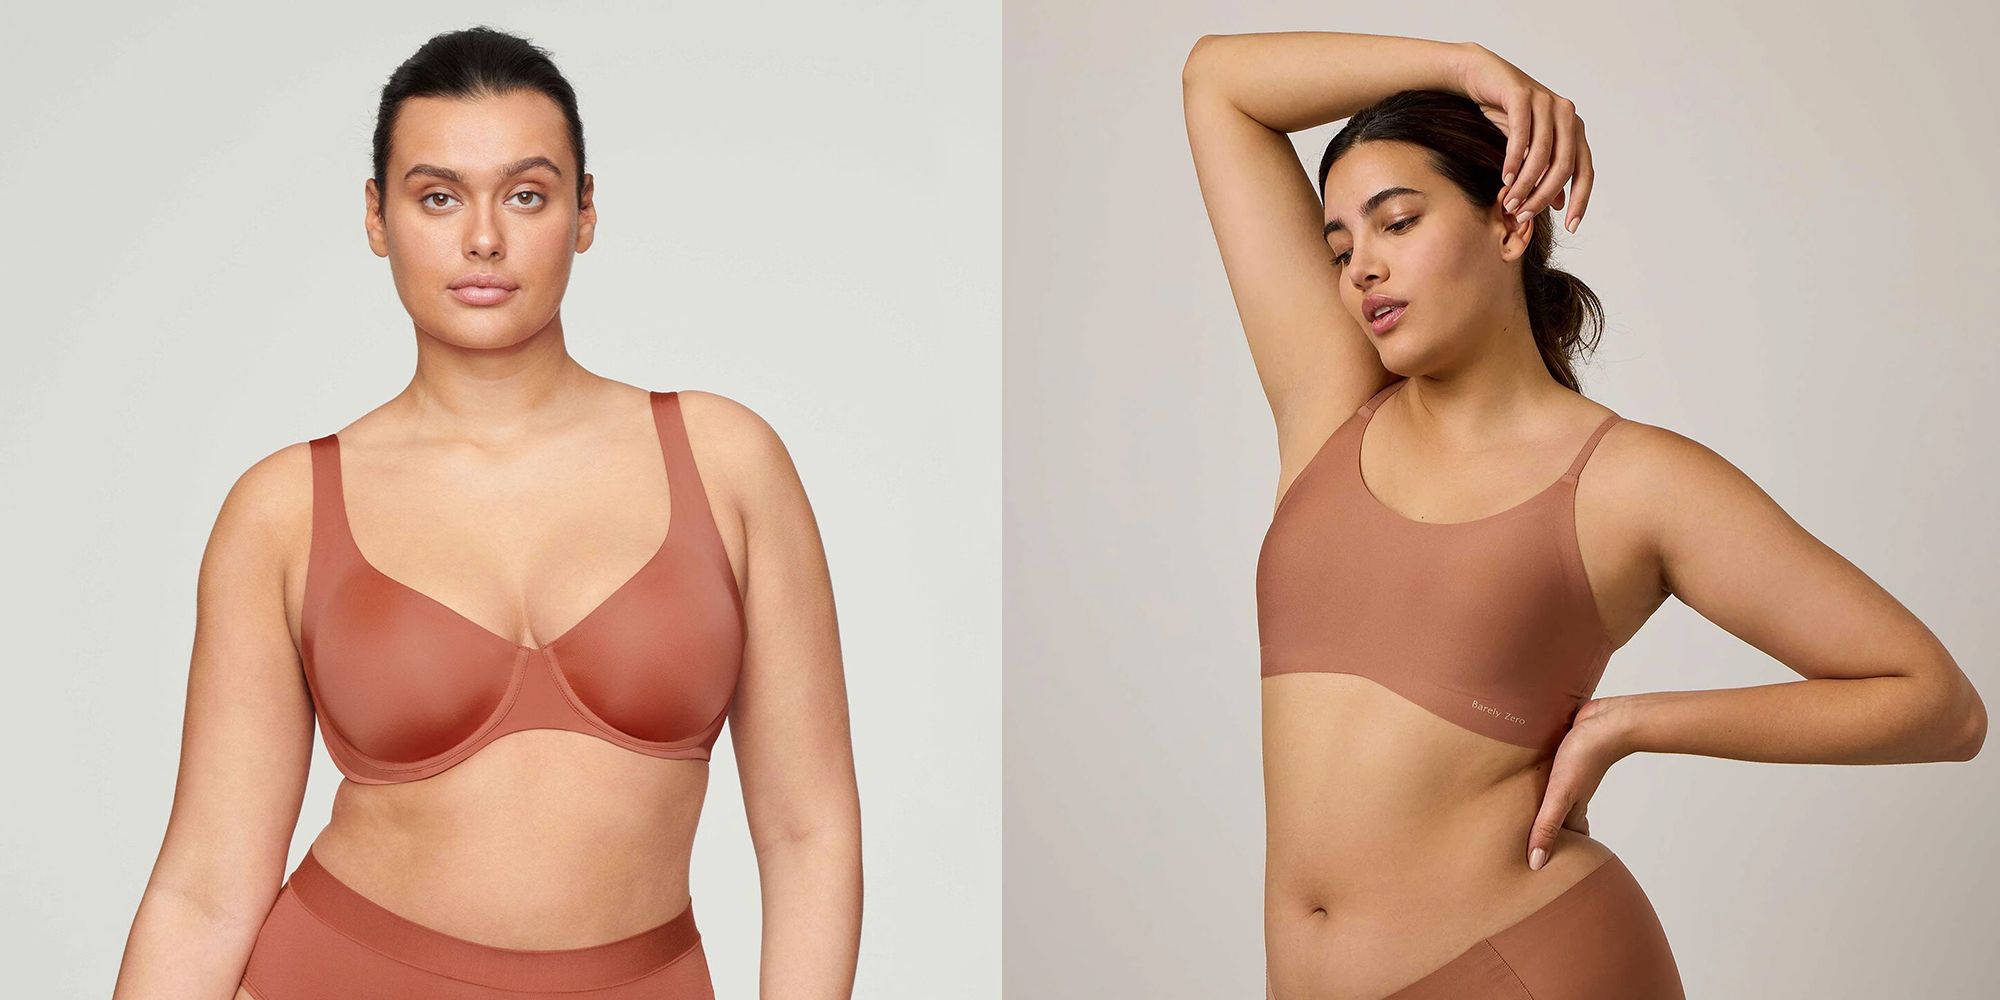 The most comfortable bra i own, but it is pretty much like being